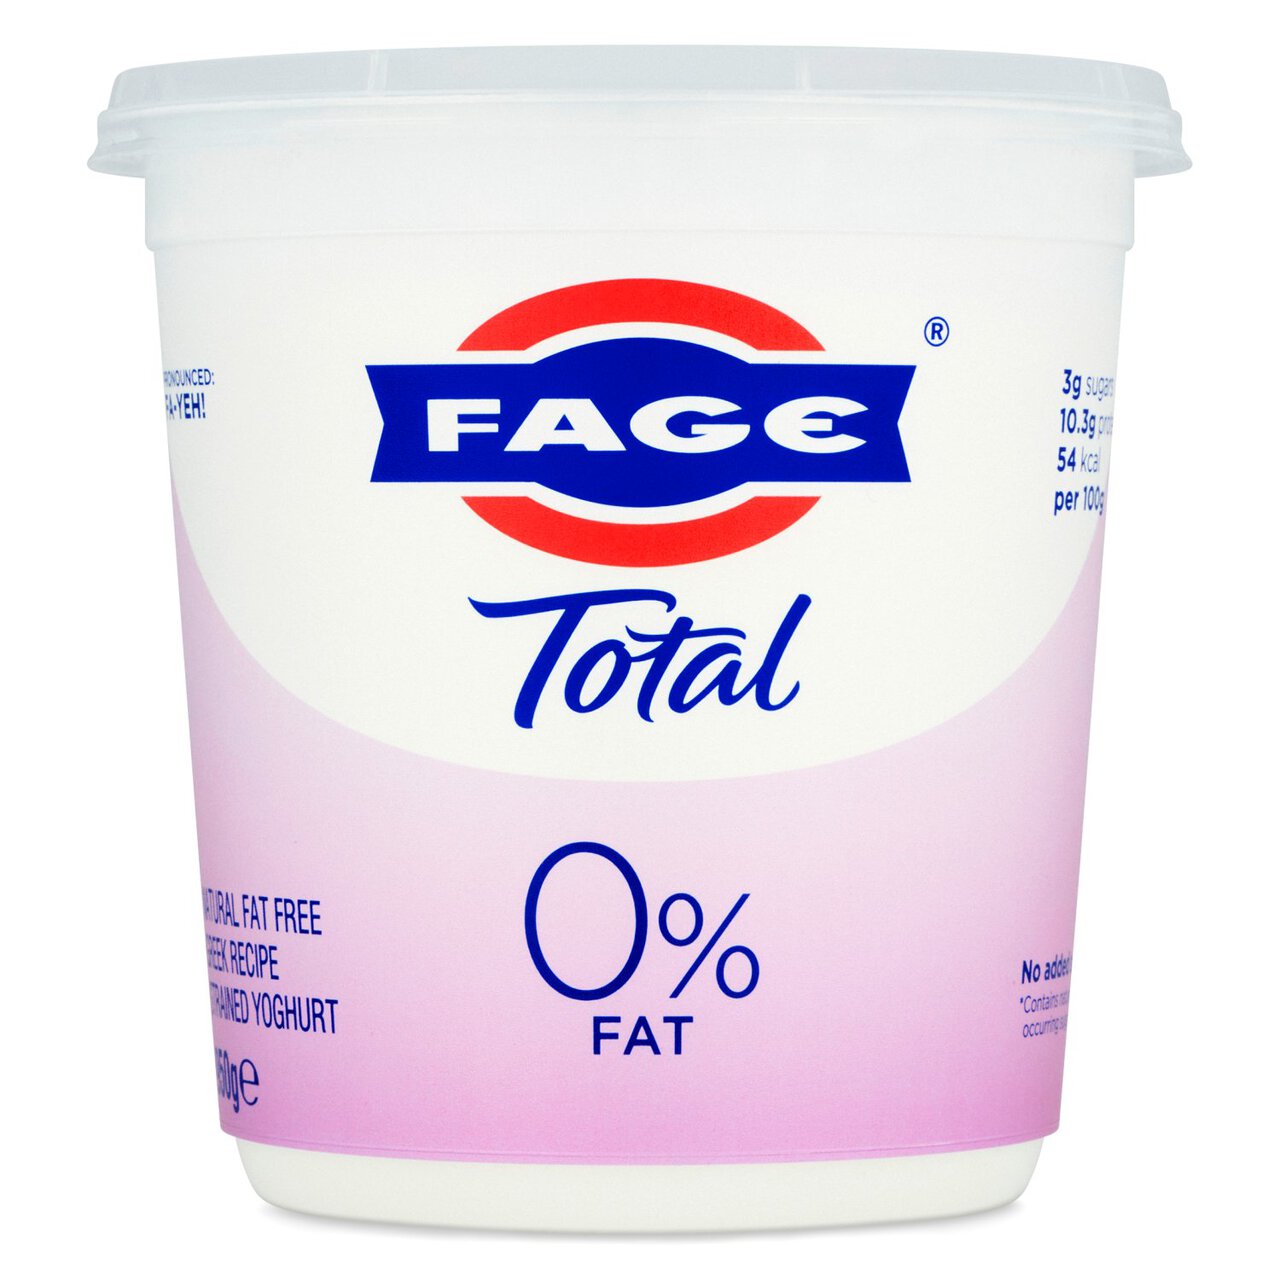 Fage Total 0% Fat Natural Fat Free Greek Recipe Strained Yoghurt 950g